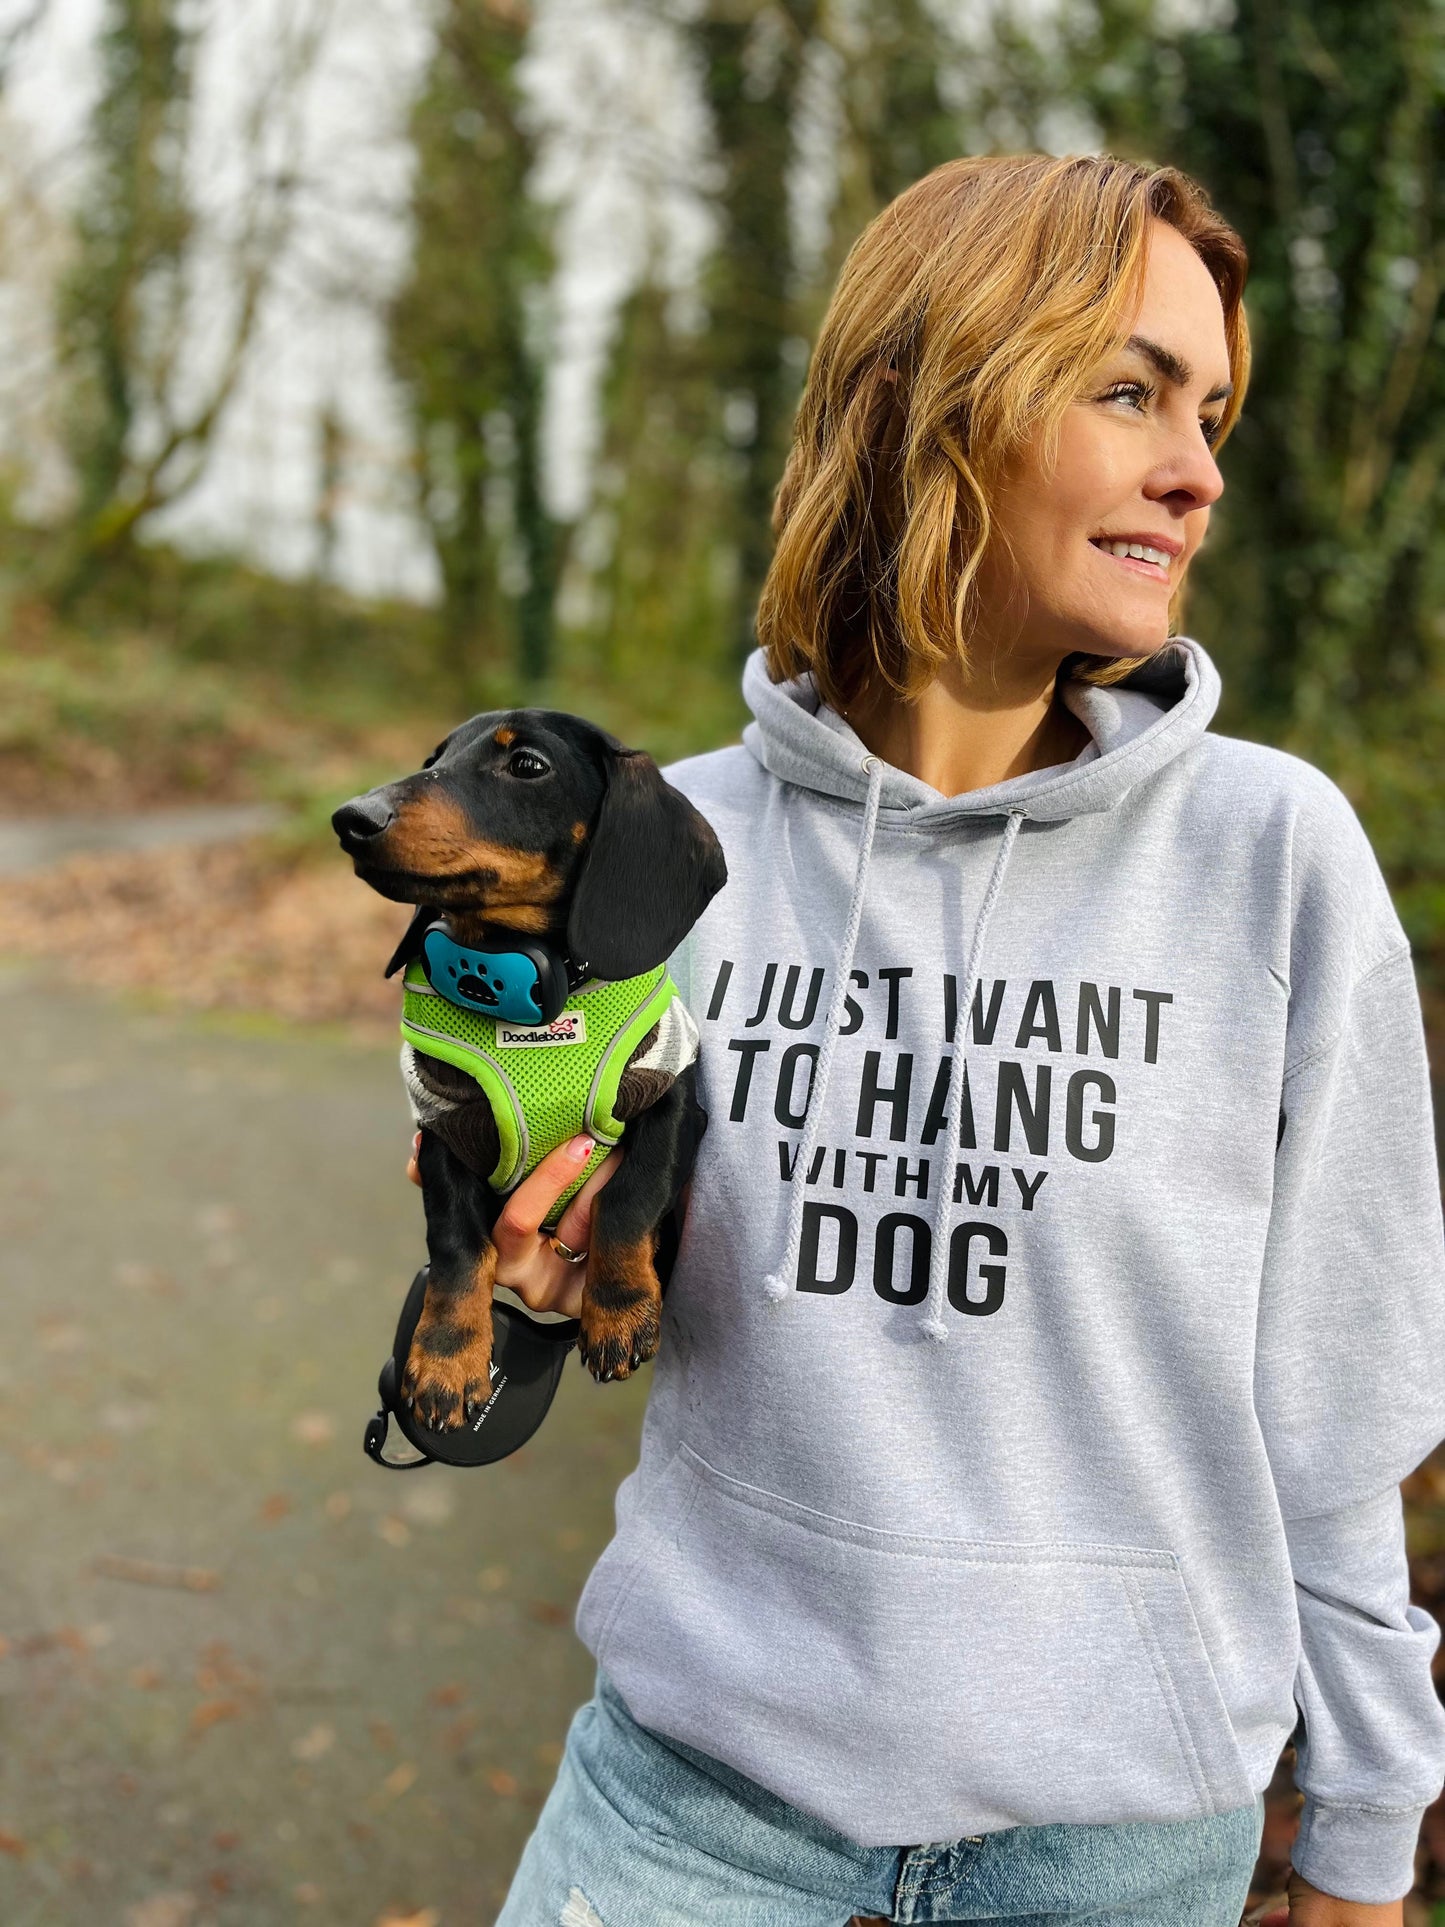 JUST WANT TO HANG WITH DOG HOODIE